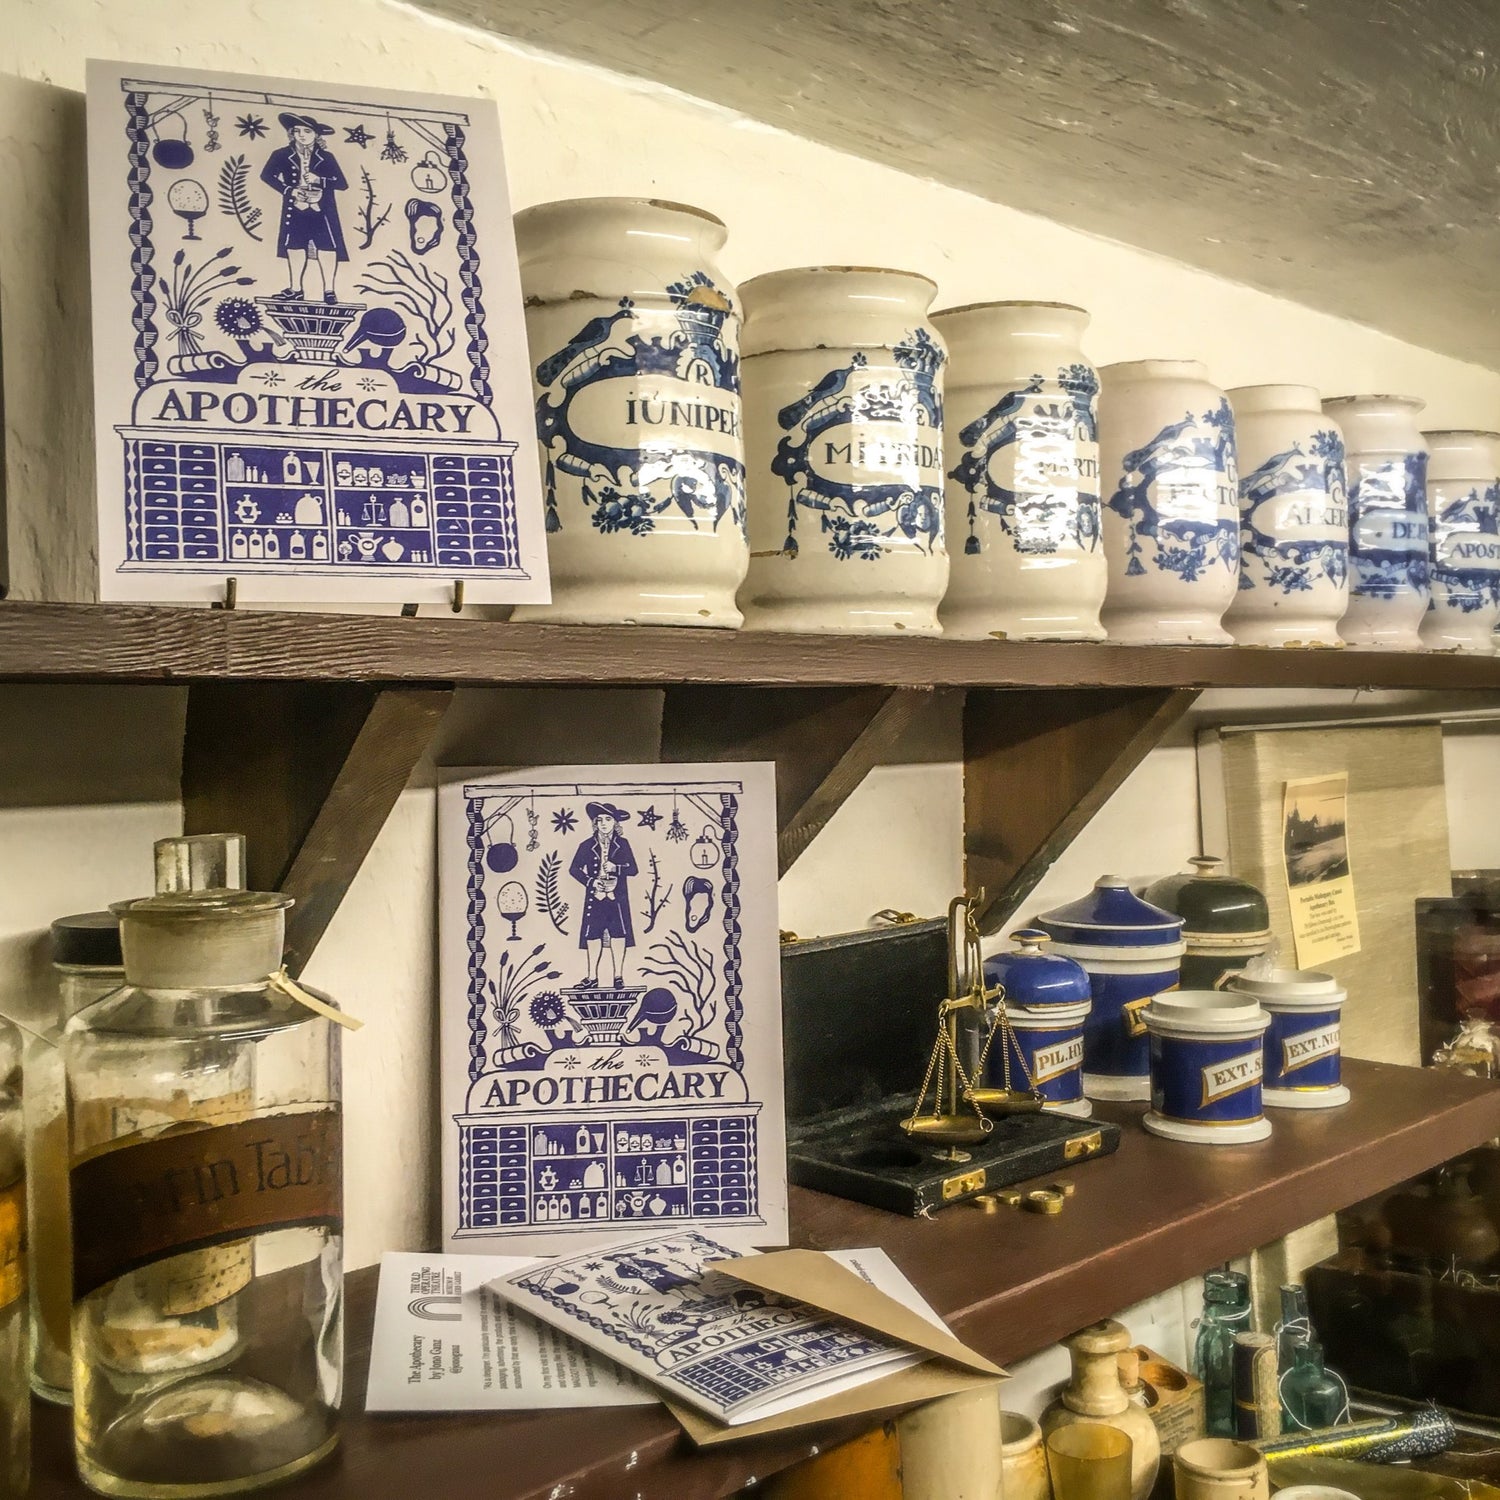 Two prints and a greetings card featuring the blue and white apothecary design, placed on shelves in the museum next to a row of blue and white apothecary jars